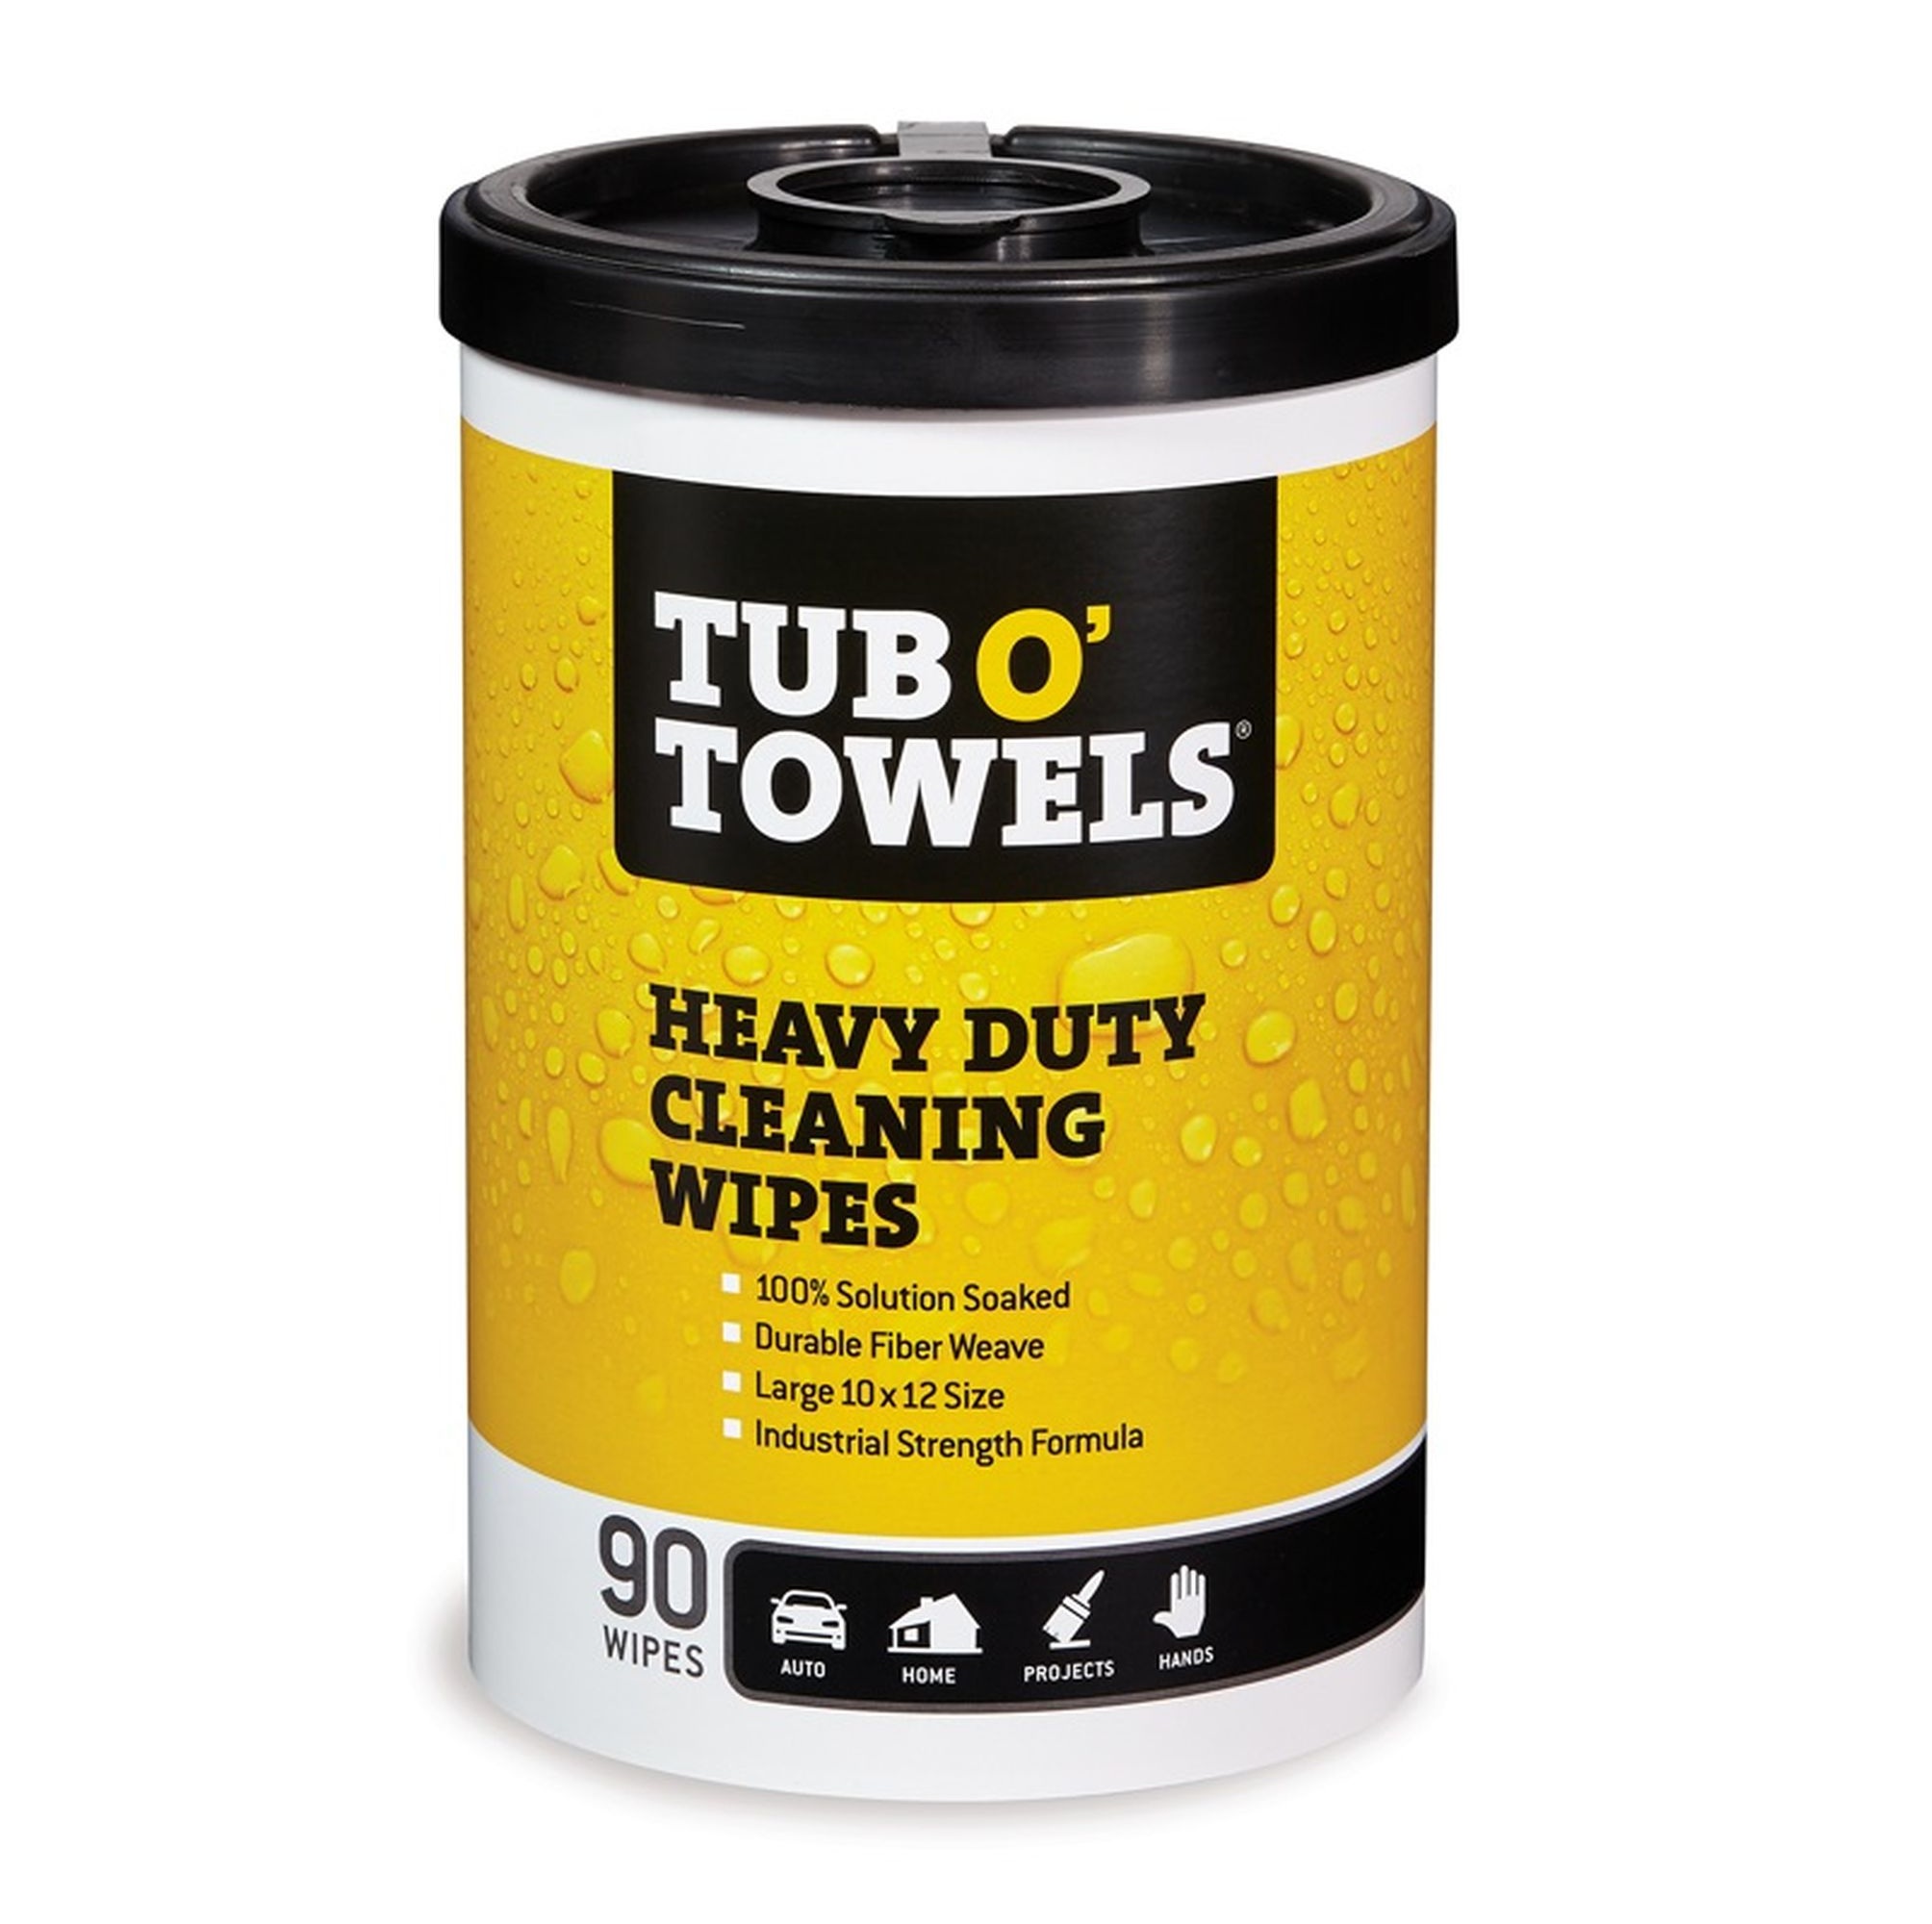 Tub O'Towels Heavy Duty Cleaning Wipes, 90 count wipes